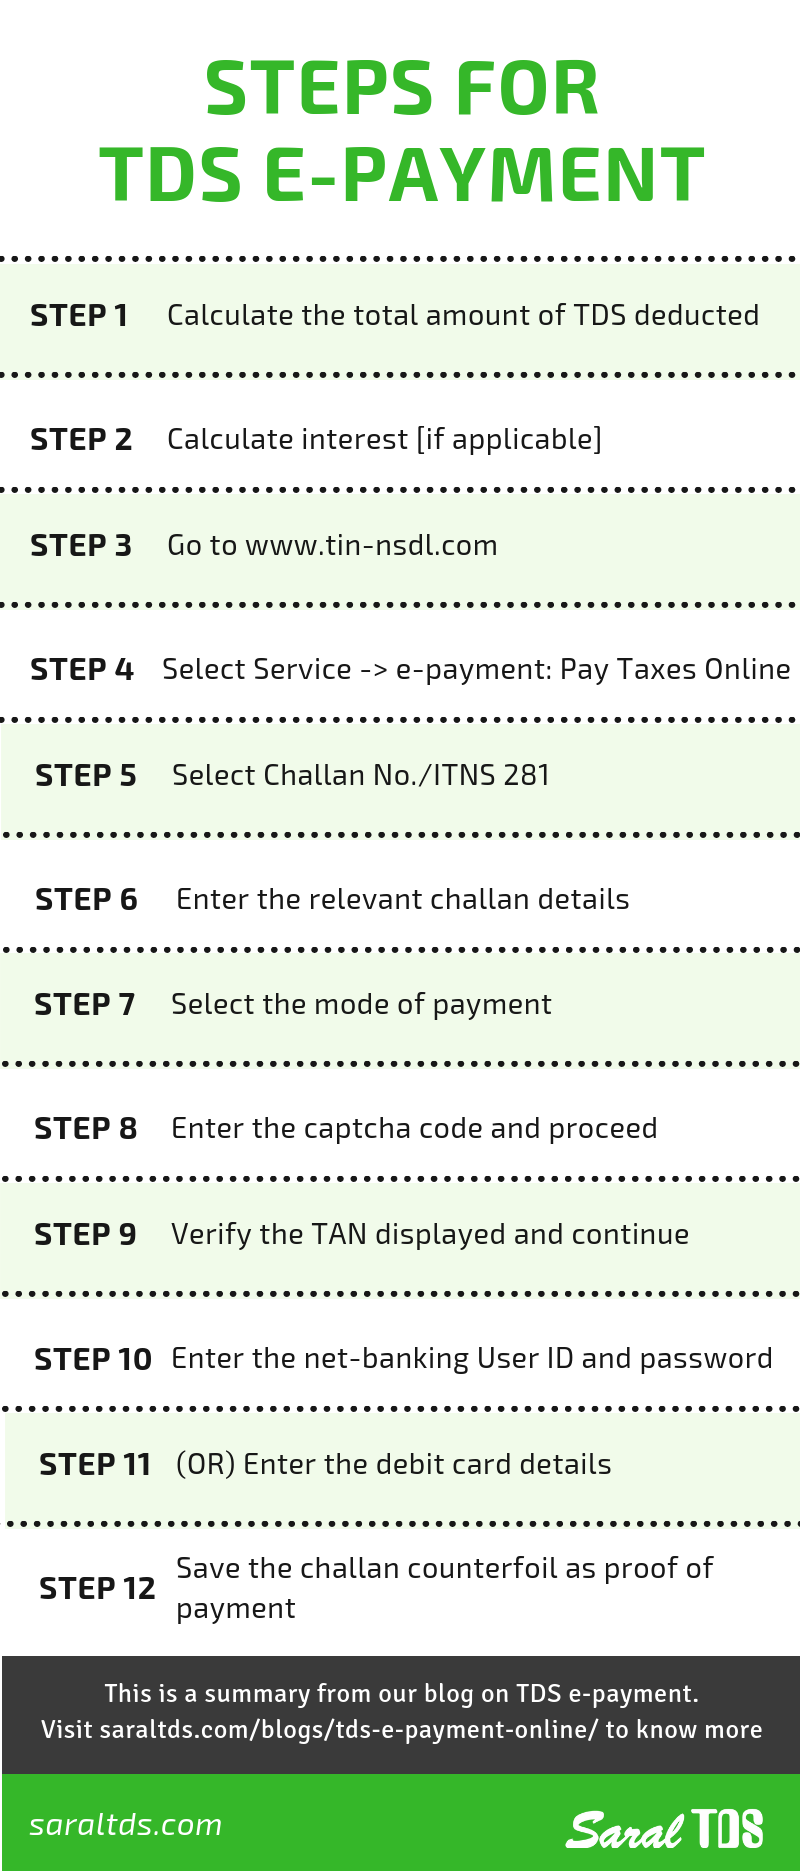 Steps for TDS e-payment